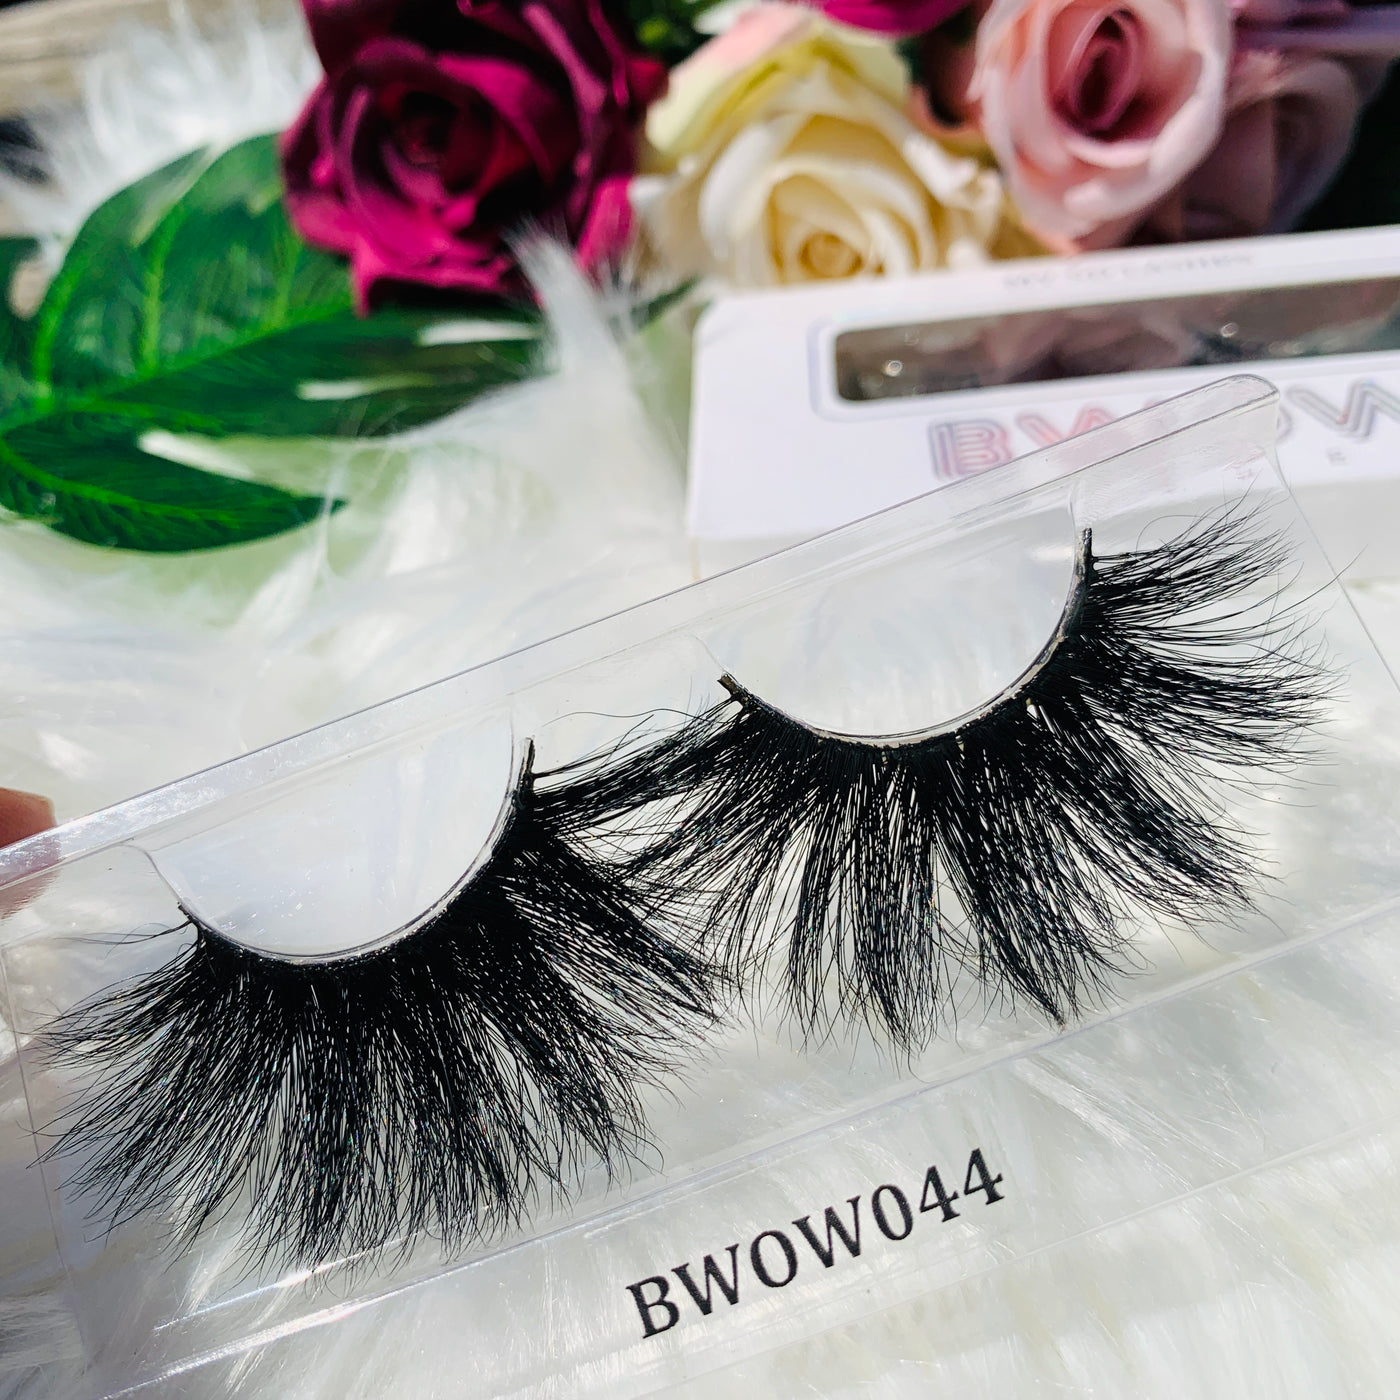 MY 5D LUXURY LASHES BWOW044 - BWOW Cosmetics